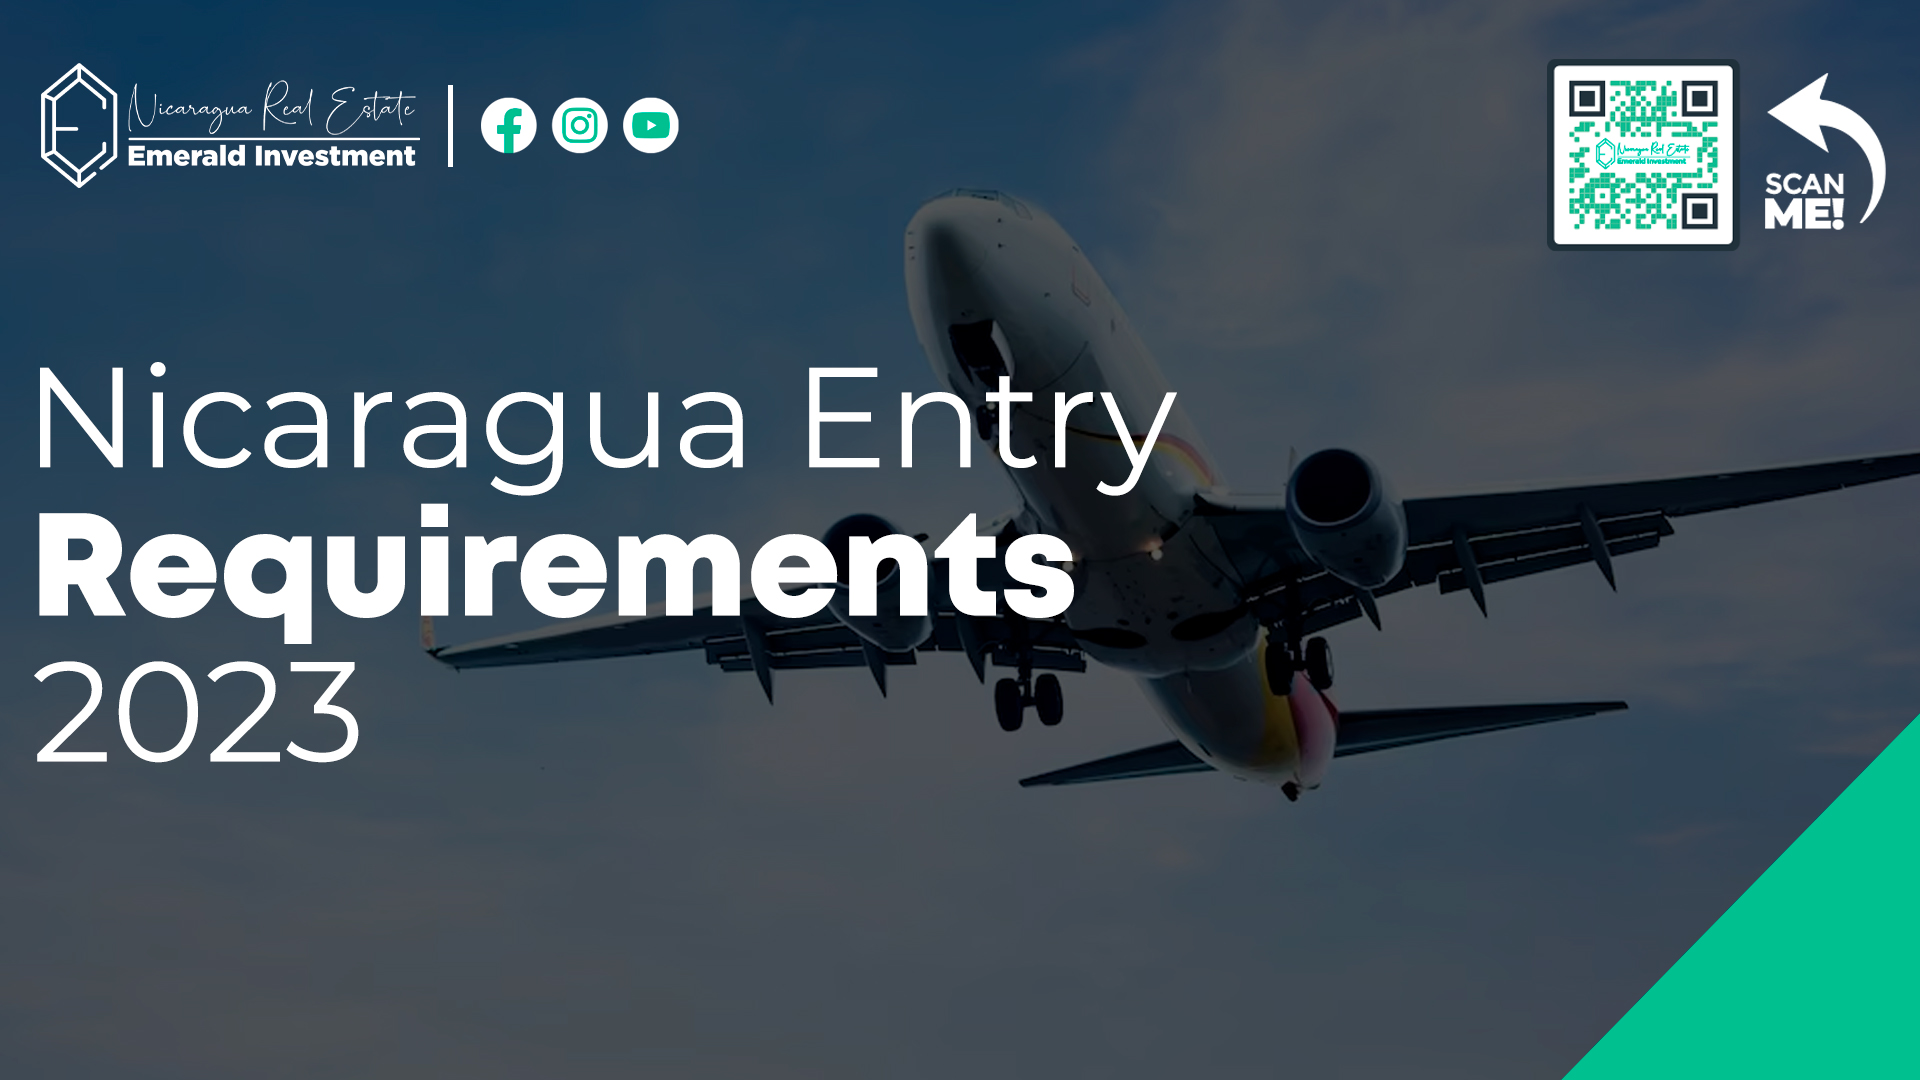 Nicaragua Entry Requirements 2023